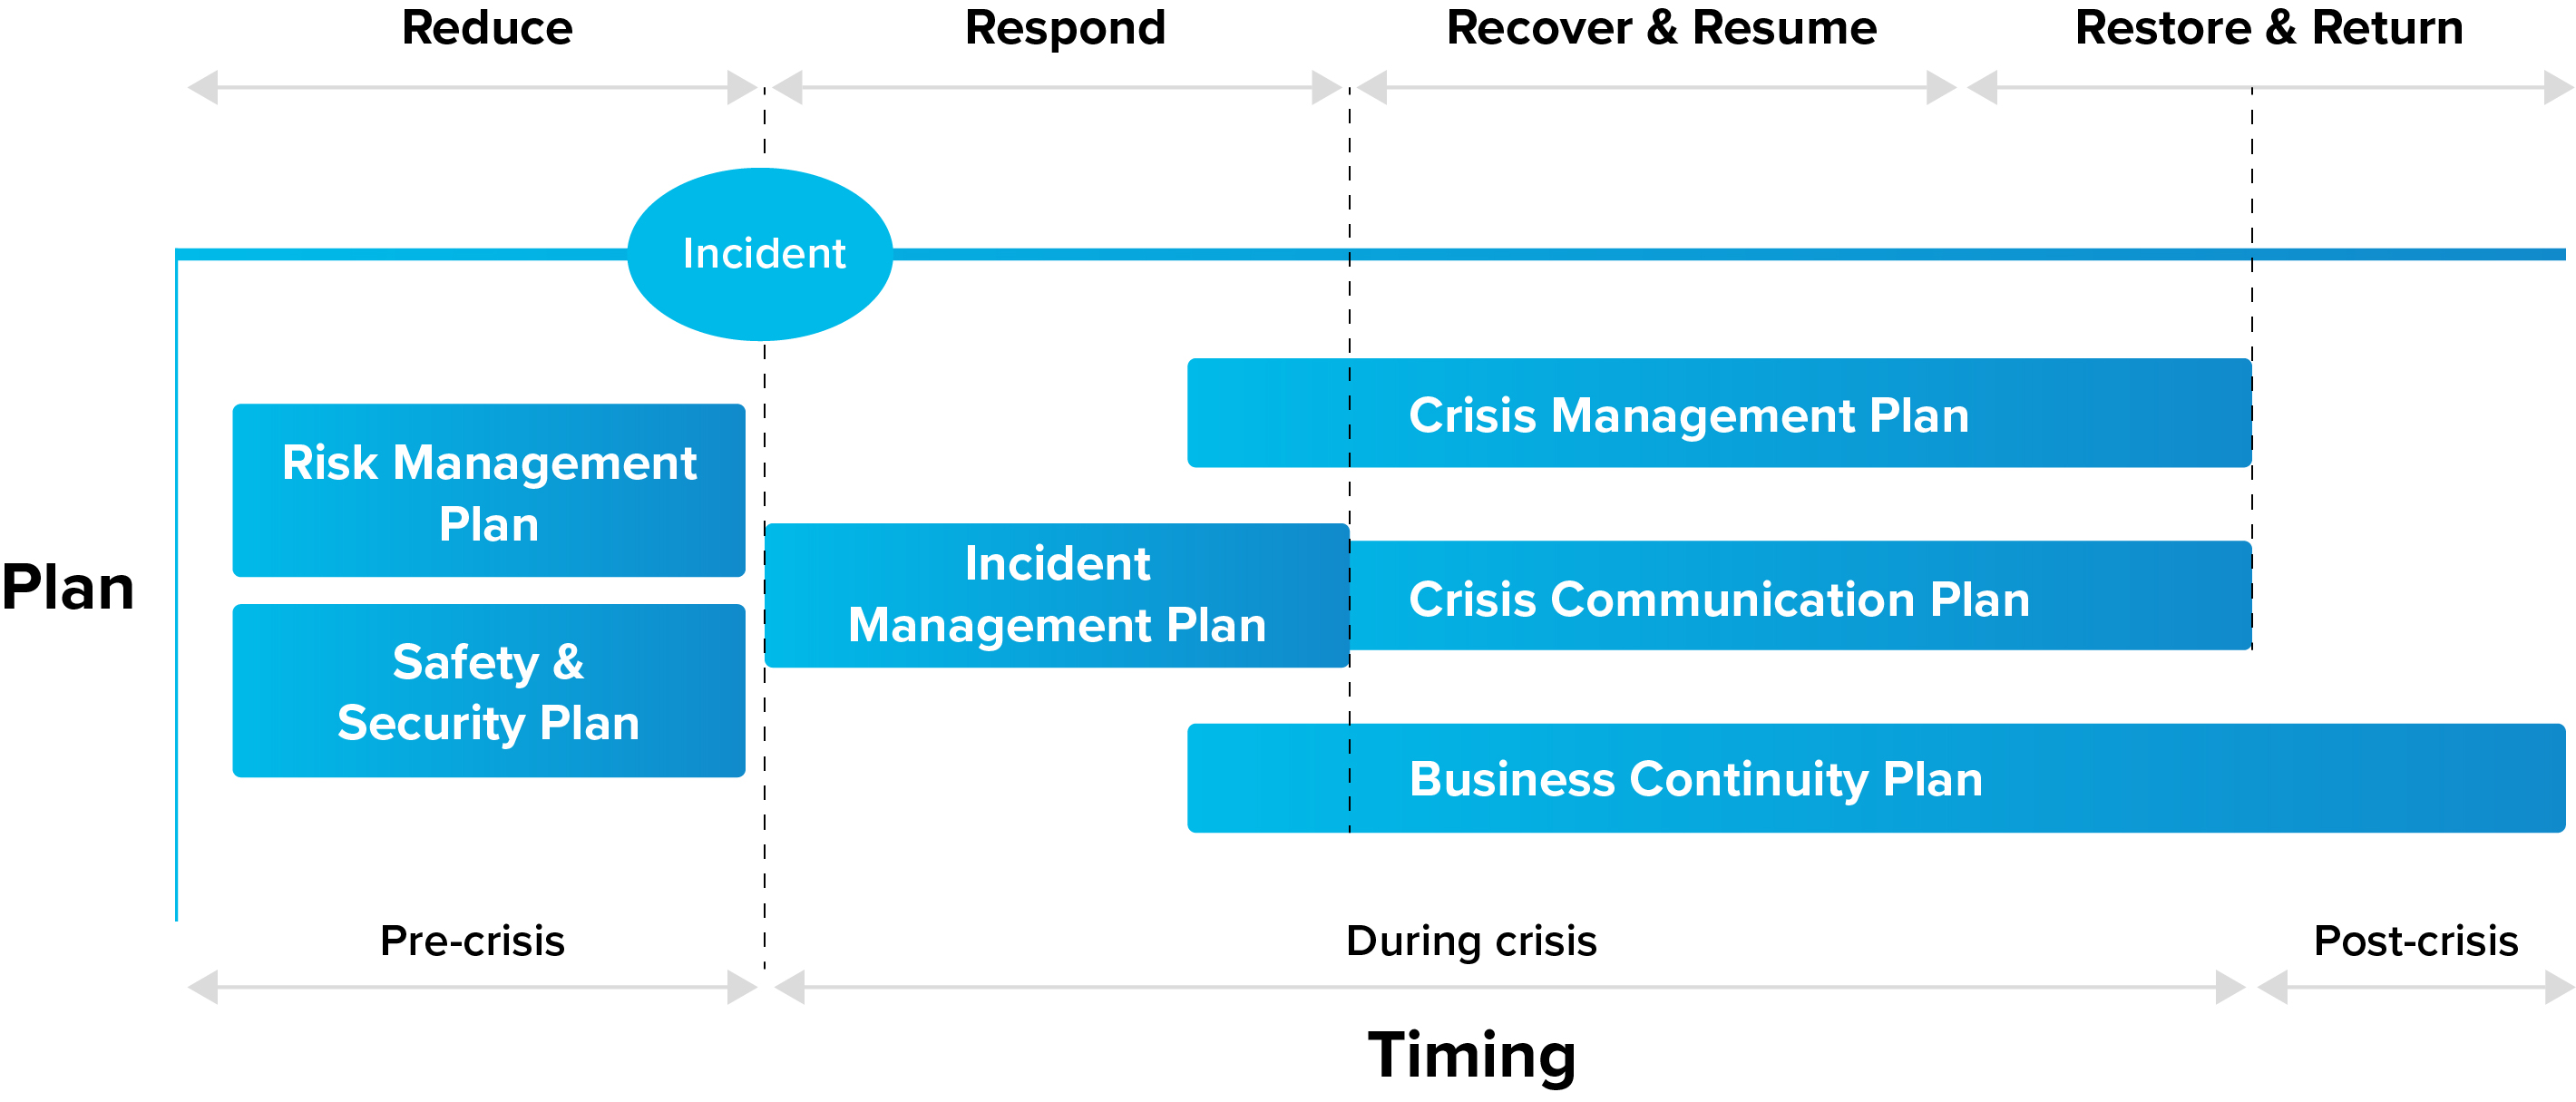 An image showing different actions required in different phases of crisis